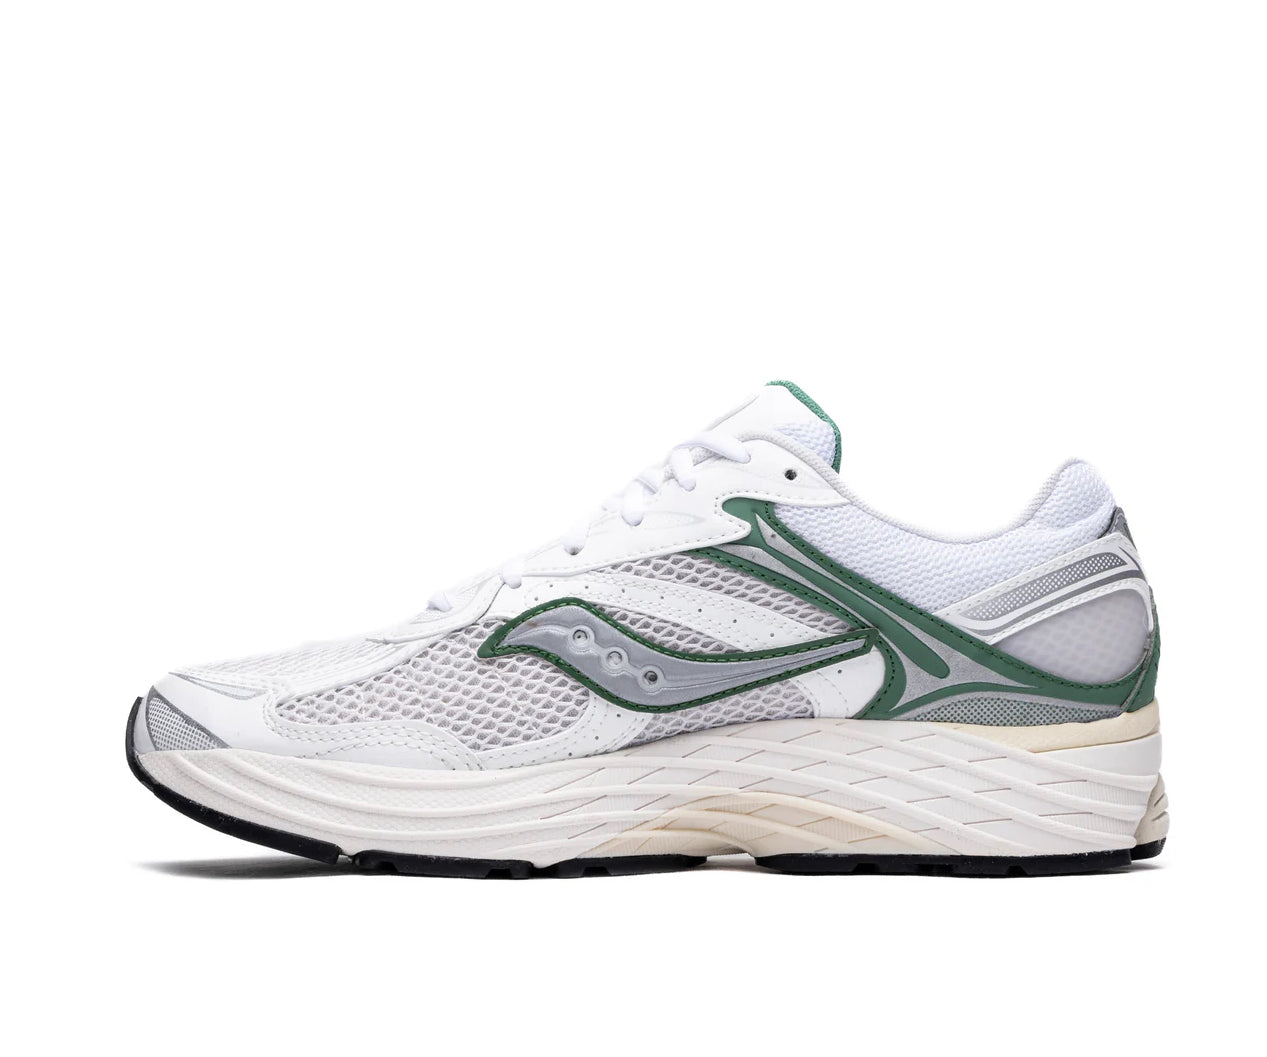 A white mesh running shoe from Saucony with green and silver accents.